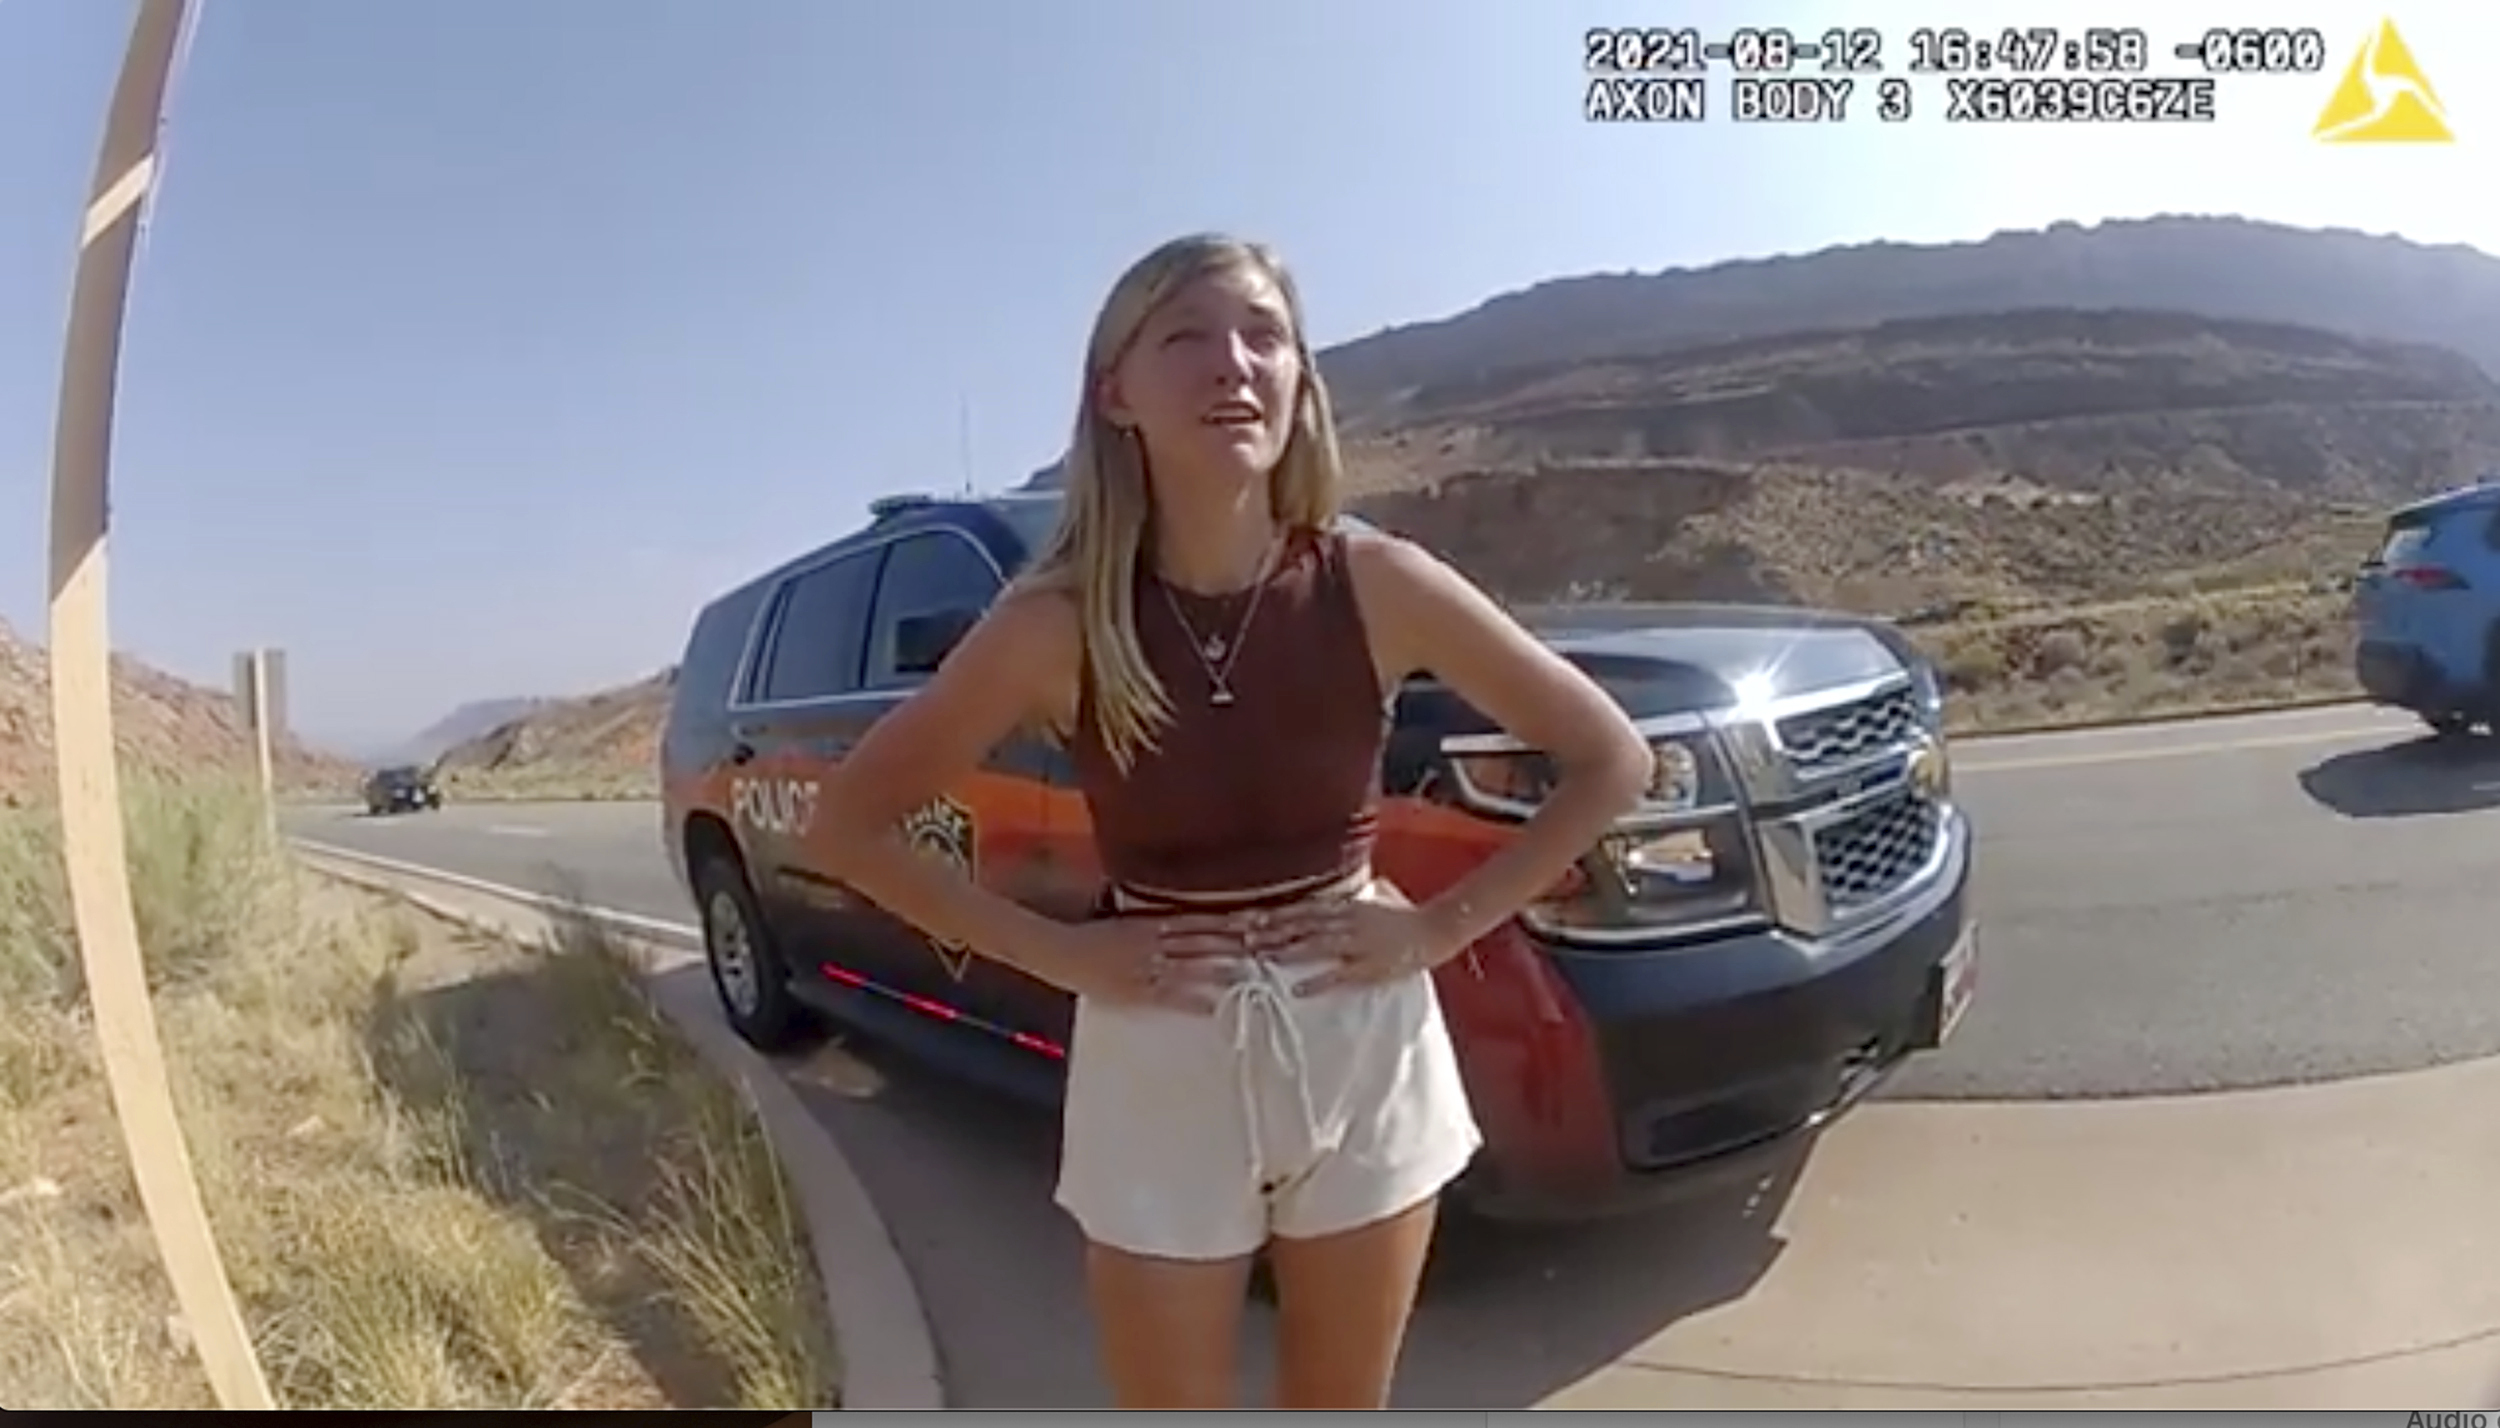 This police camera video provided by The Moab Police Department shows Gabrielle “Gabby” Petito talking to a police officer after police pulled over the van she was traveling in with her boyfriend, Brian Laundrie, near the entrance to Arches National Park on Aug. 12, 2021.